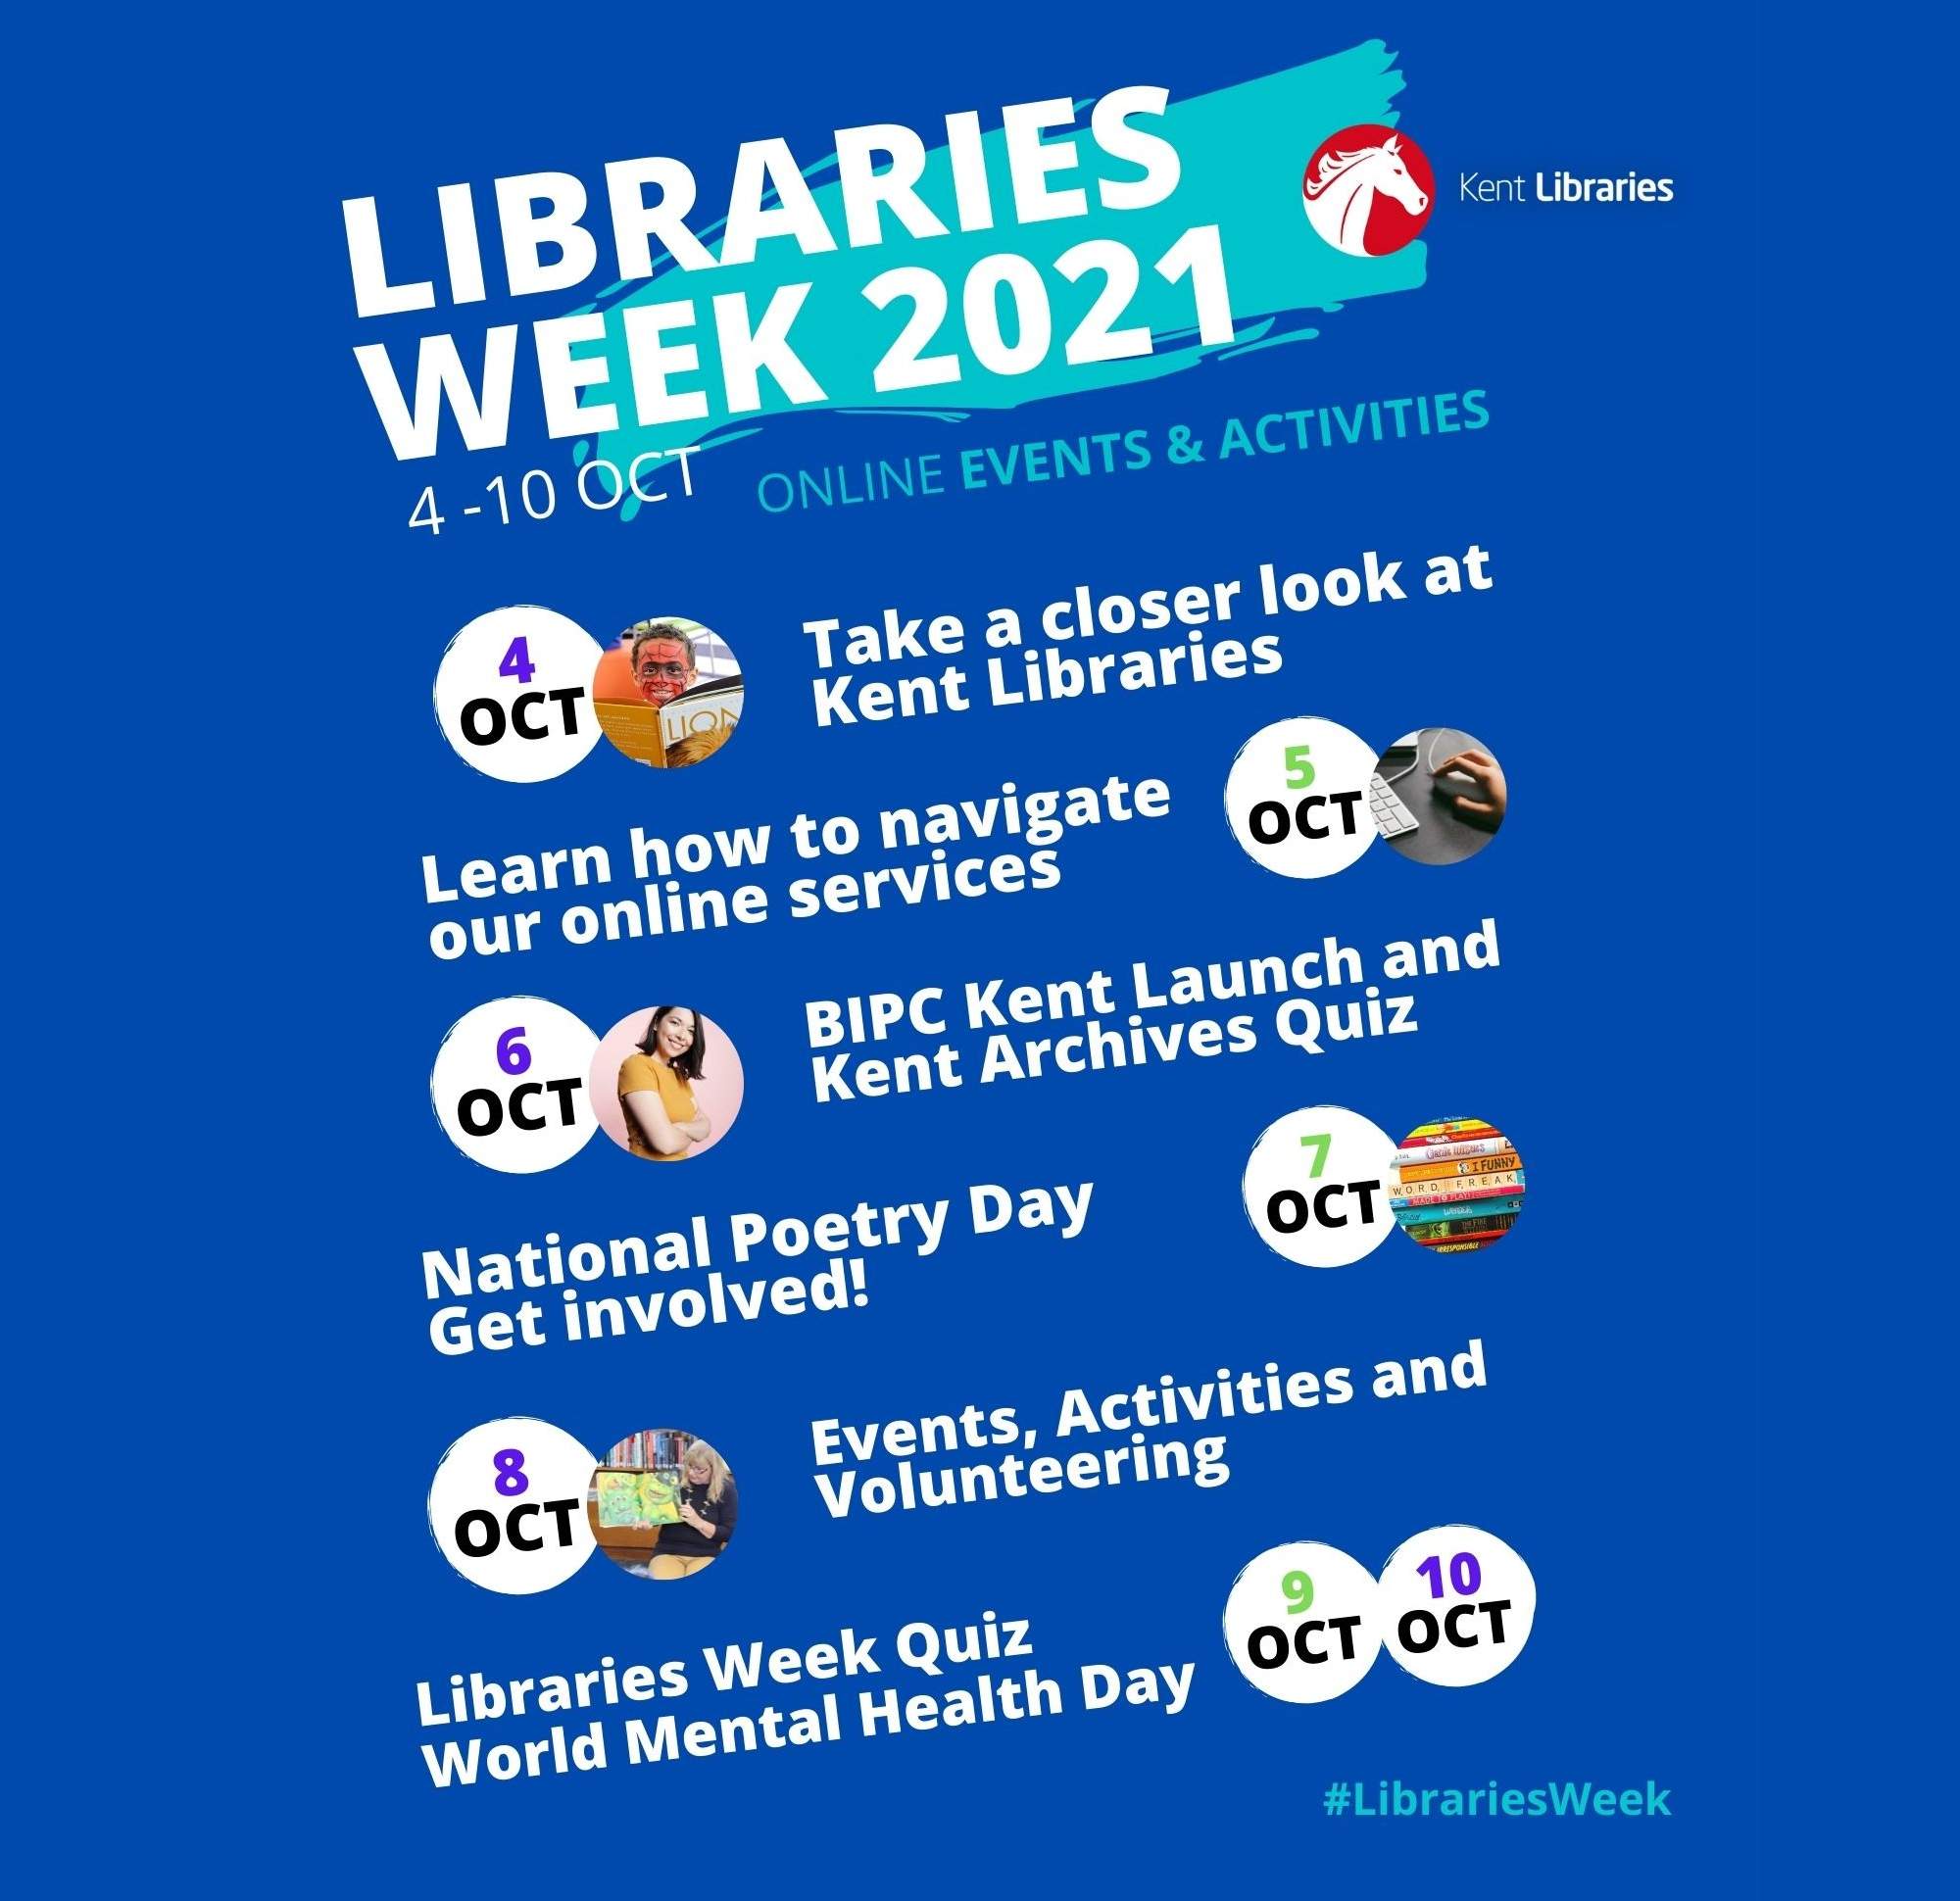 Libraries Week What's on Online? Mon Take a closer look at Kent Libraries, Tues Online Services, Wed BIPC Kent Launch and Archives Quiz, Thurs Nat Poetry Day, Fri Events and Volunteering, Sat Quiz, Sun Mental Health Day